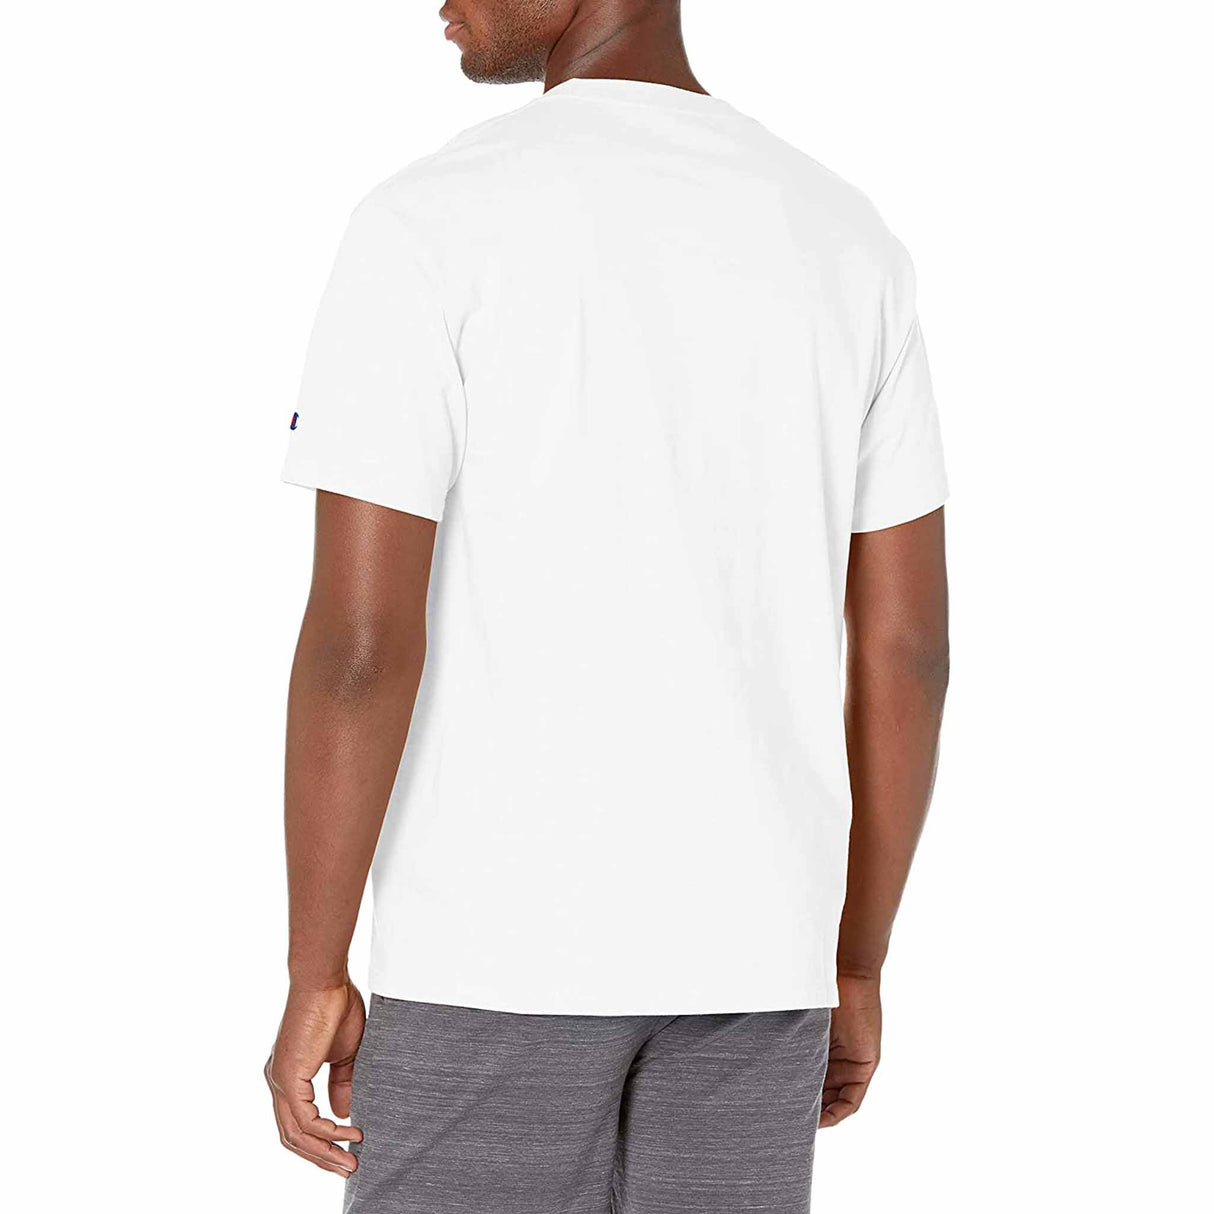 Champion Classic Graphic Tee Melting Champ t-shirt manches courtes pour homme - Blanc